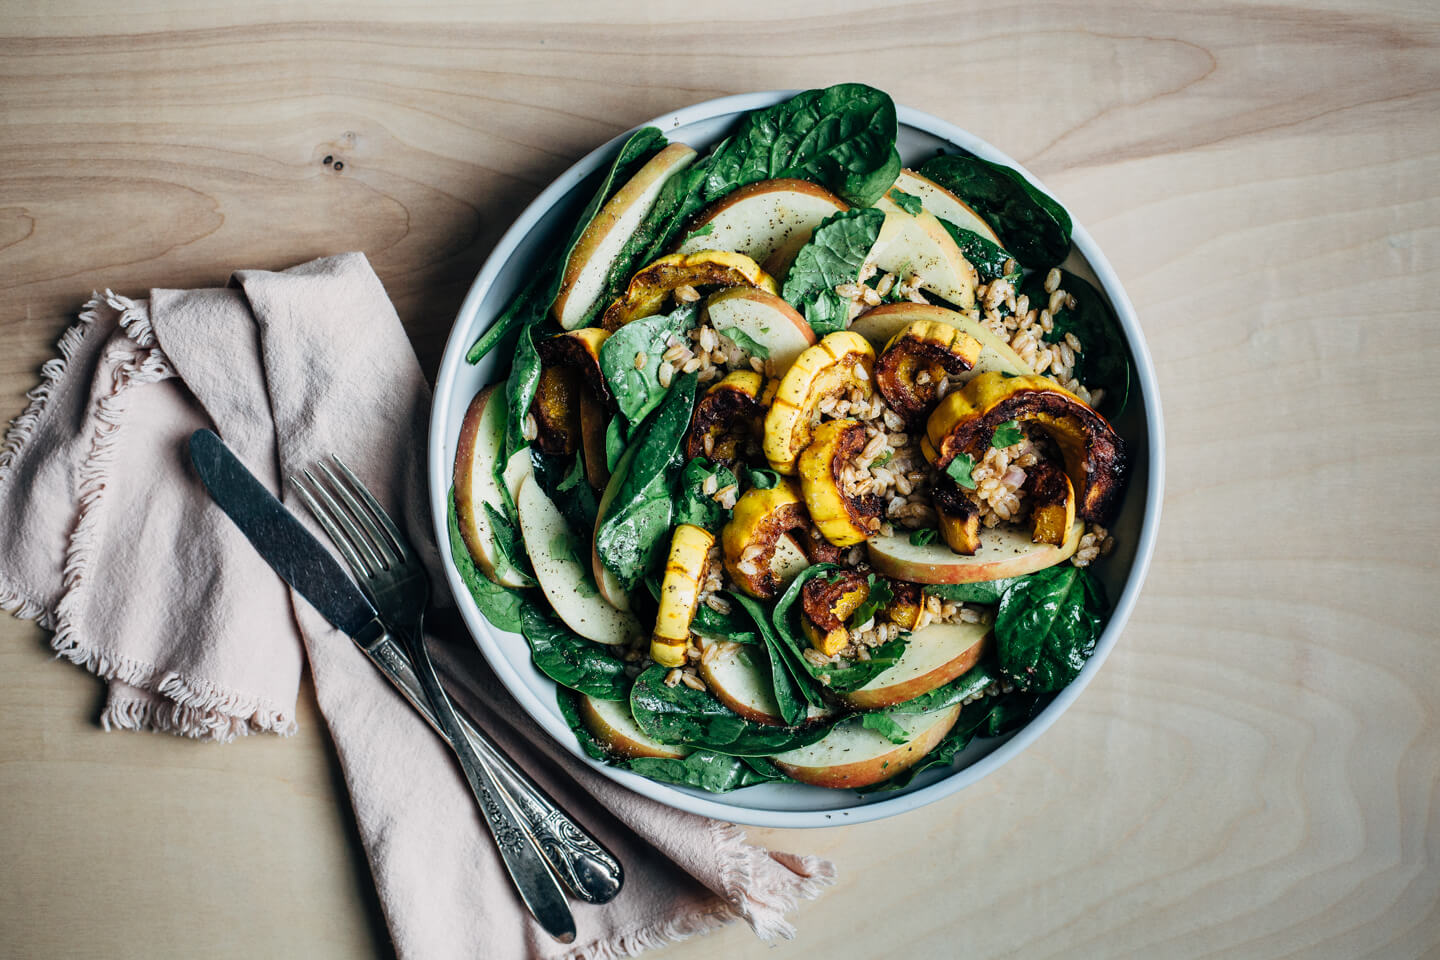 A wide bowl with greens, roasted squash, apples, and farro. A napkin with cutlery is alongside.